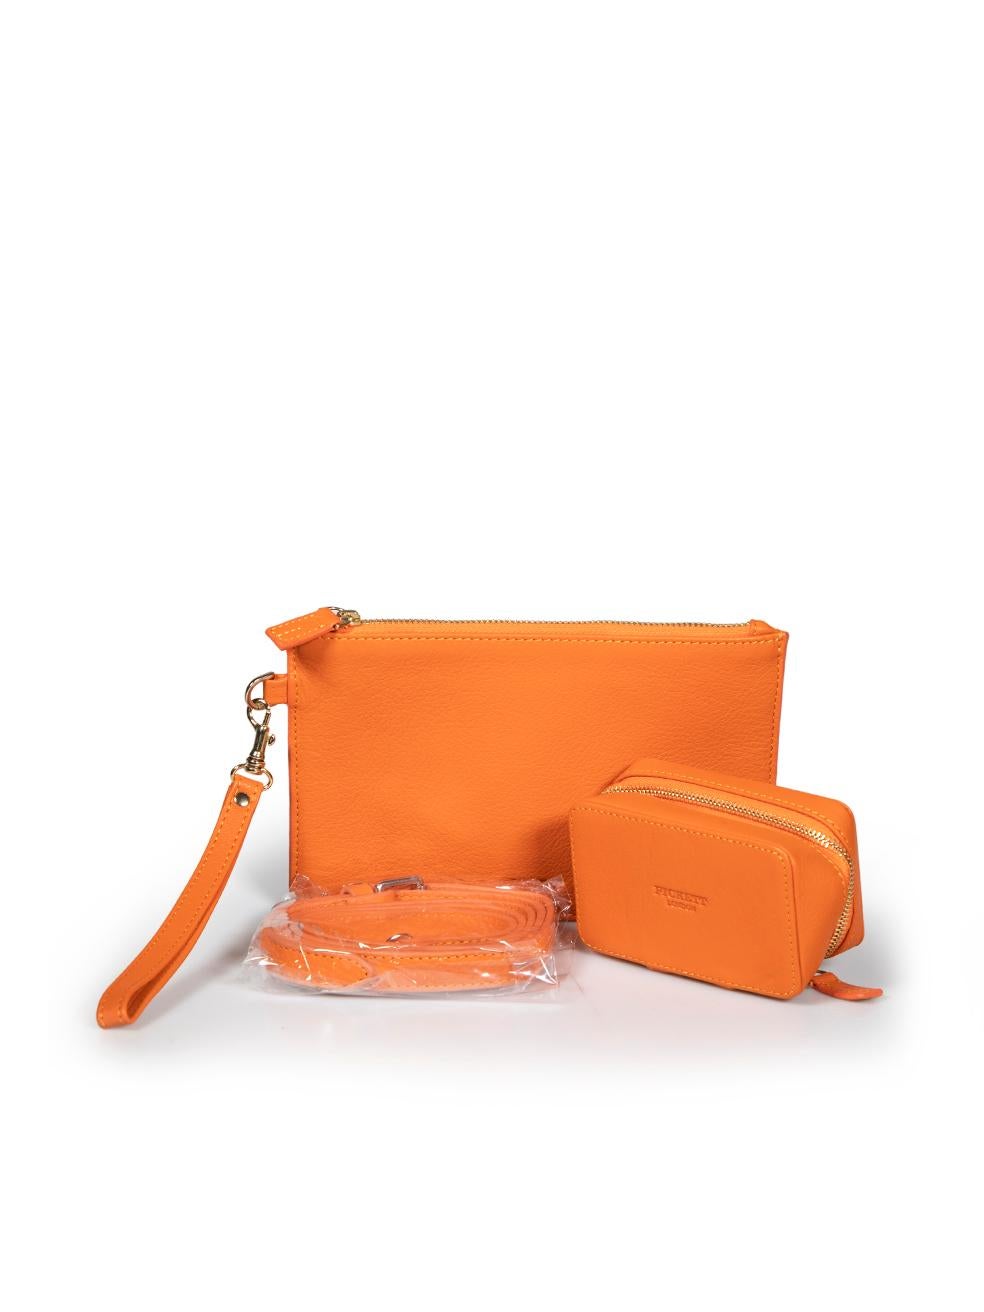 Pickett Orange Leather Convertible Bag For Sale 2